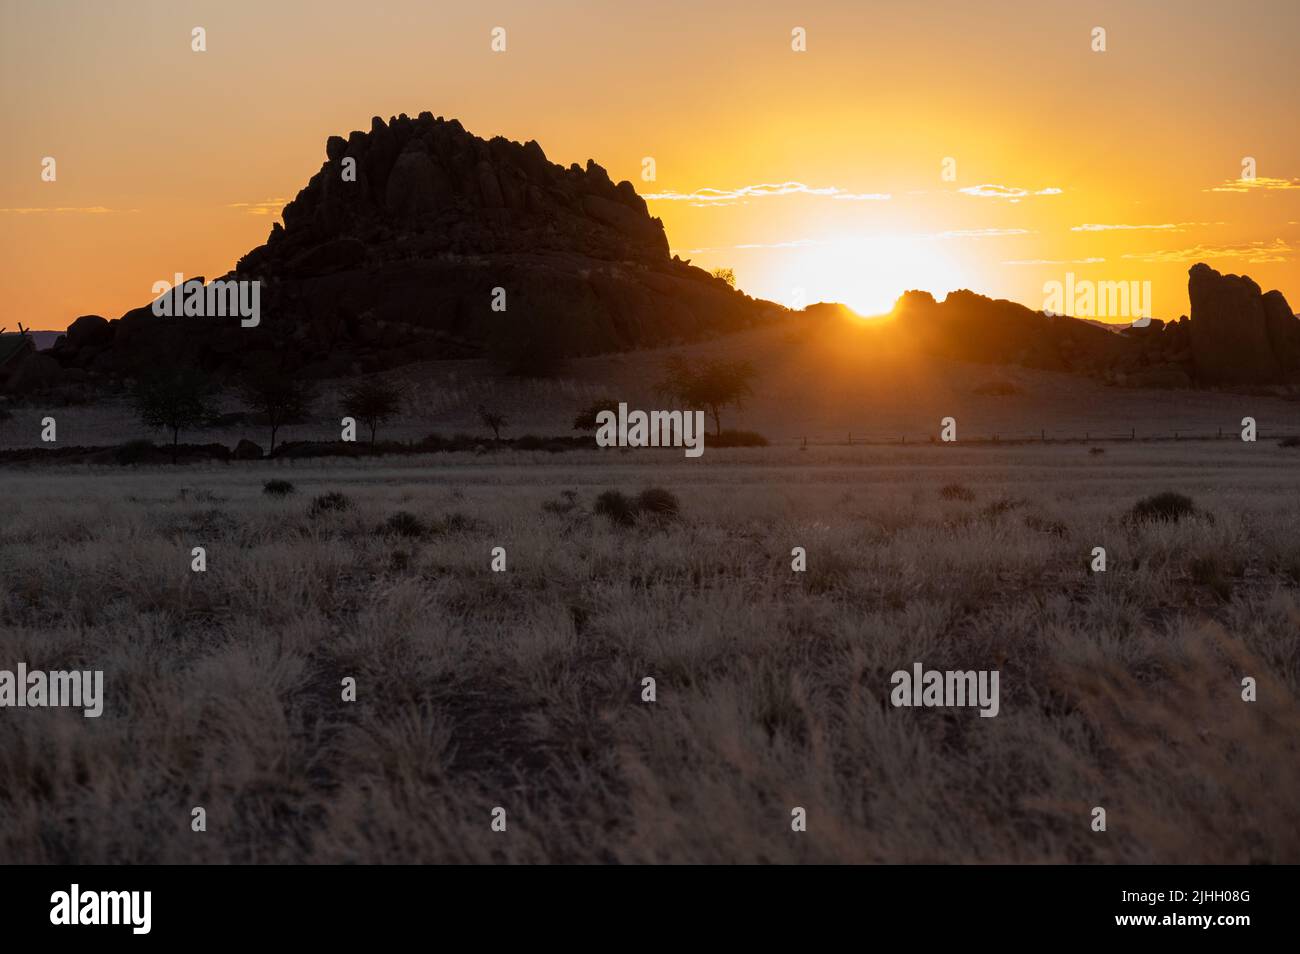 African sunset with mountains and grass plains Stock Photo